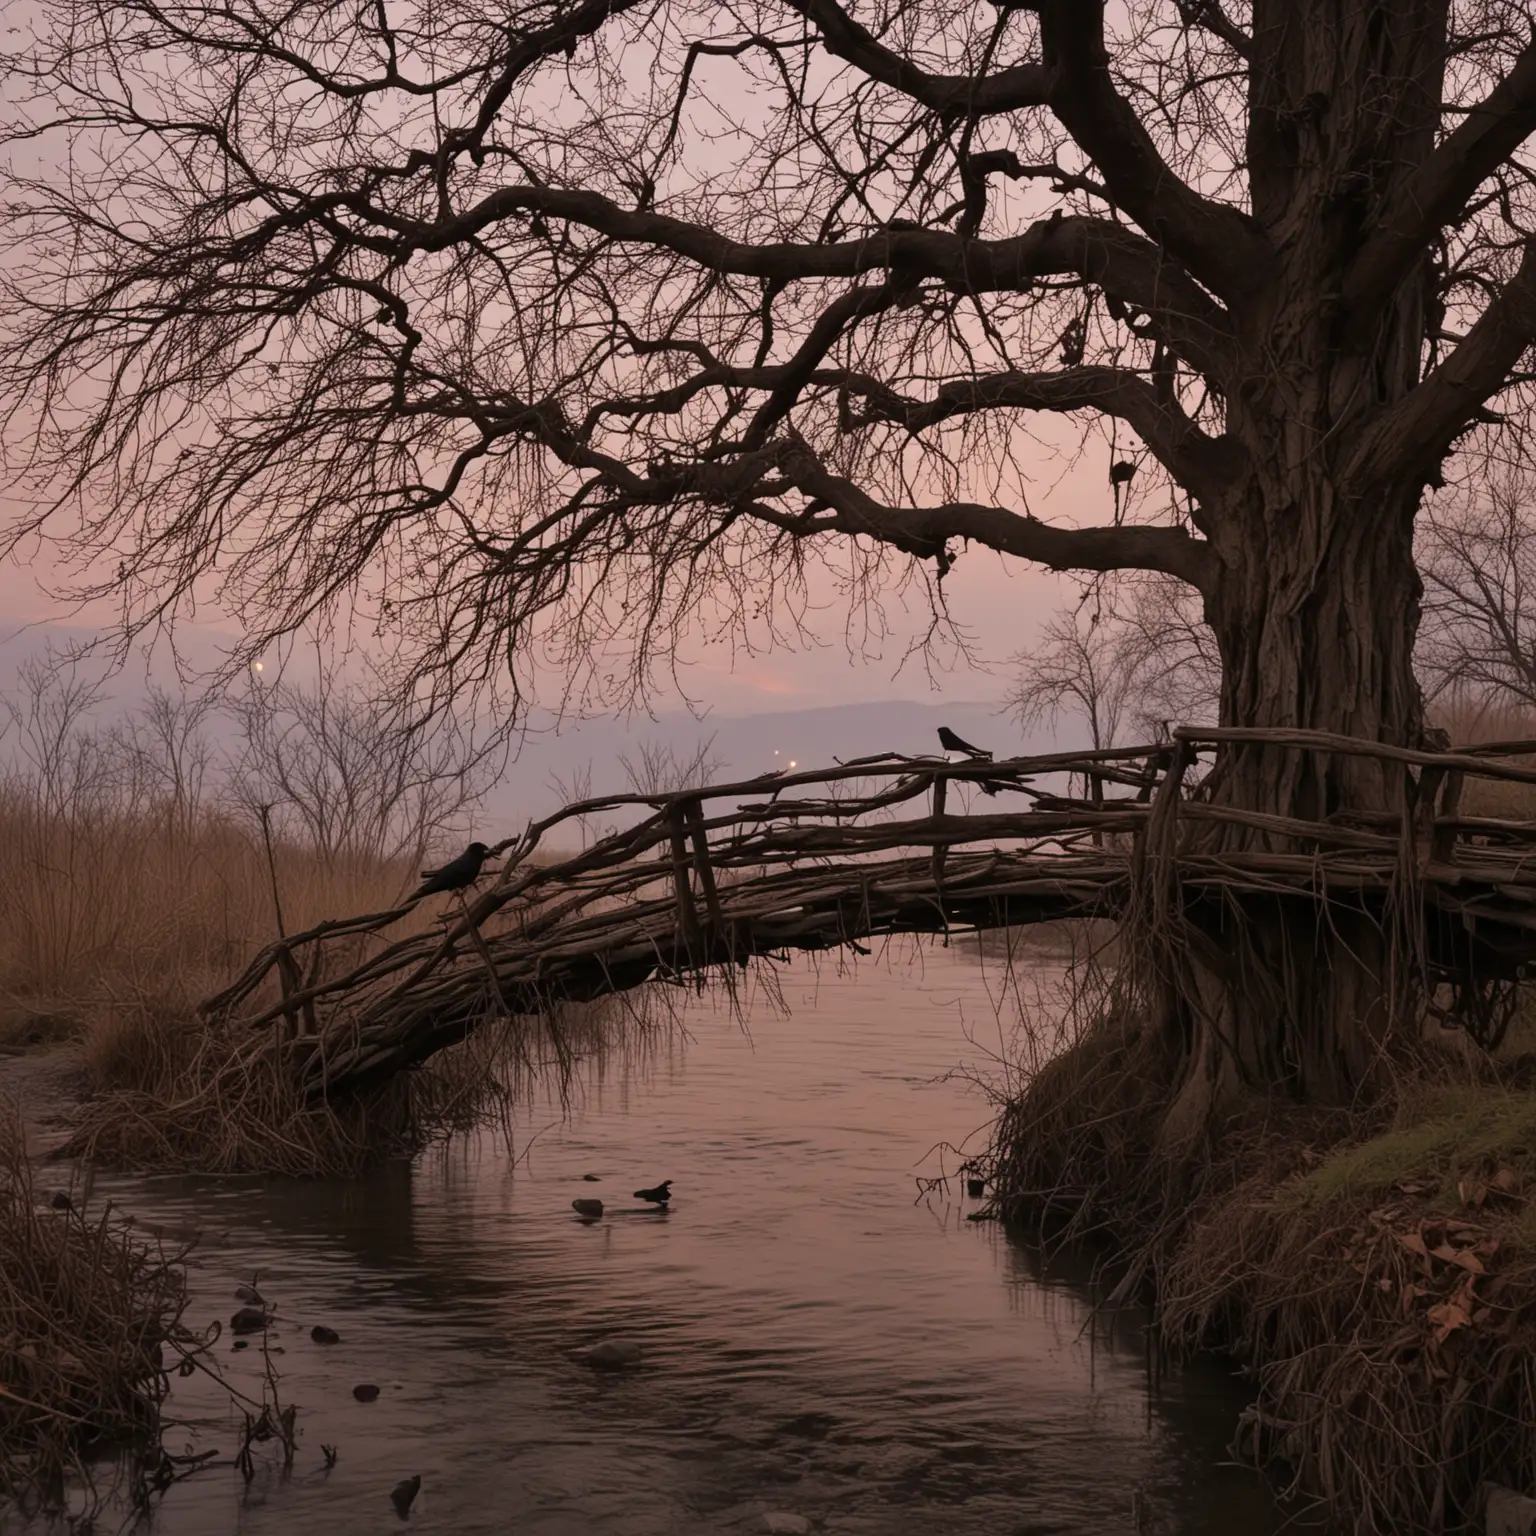 Dusk-Scene-with-Withered-Vine-Old-Tree-Raven-Little-Bridge-and-Flowing-Water-Home